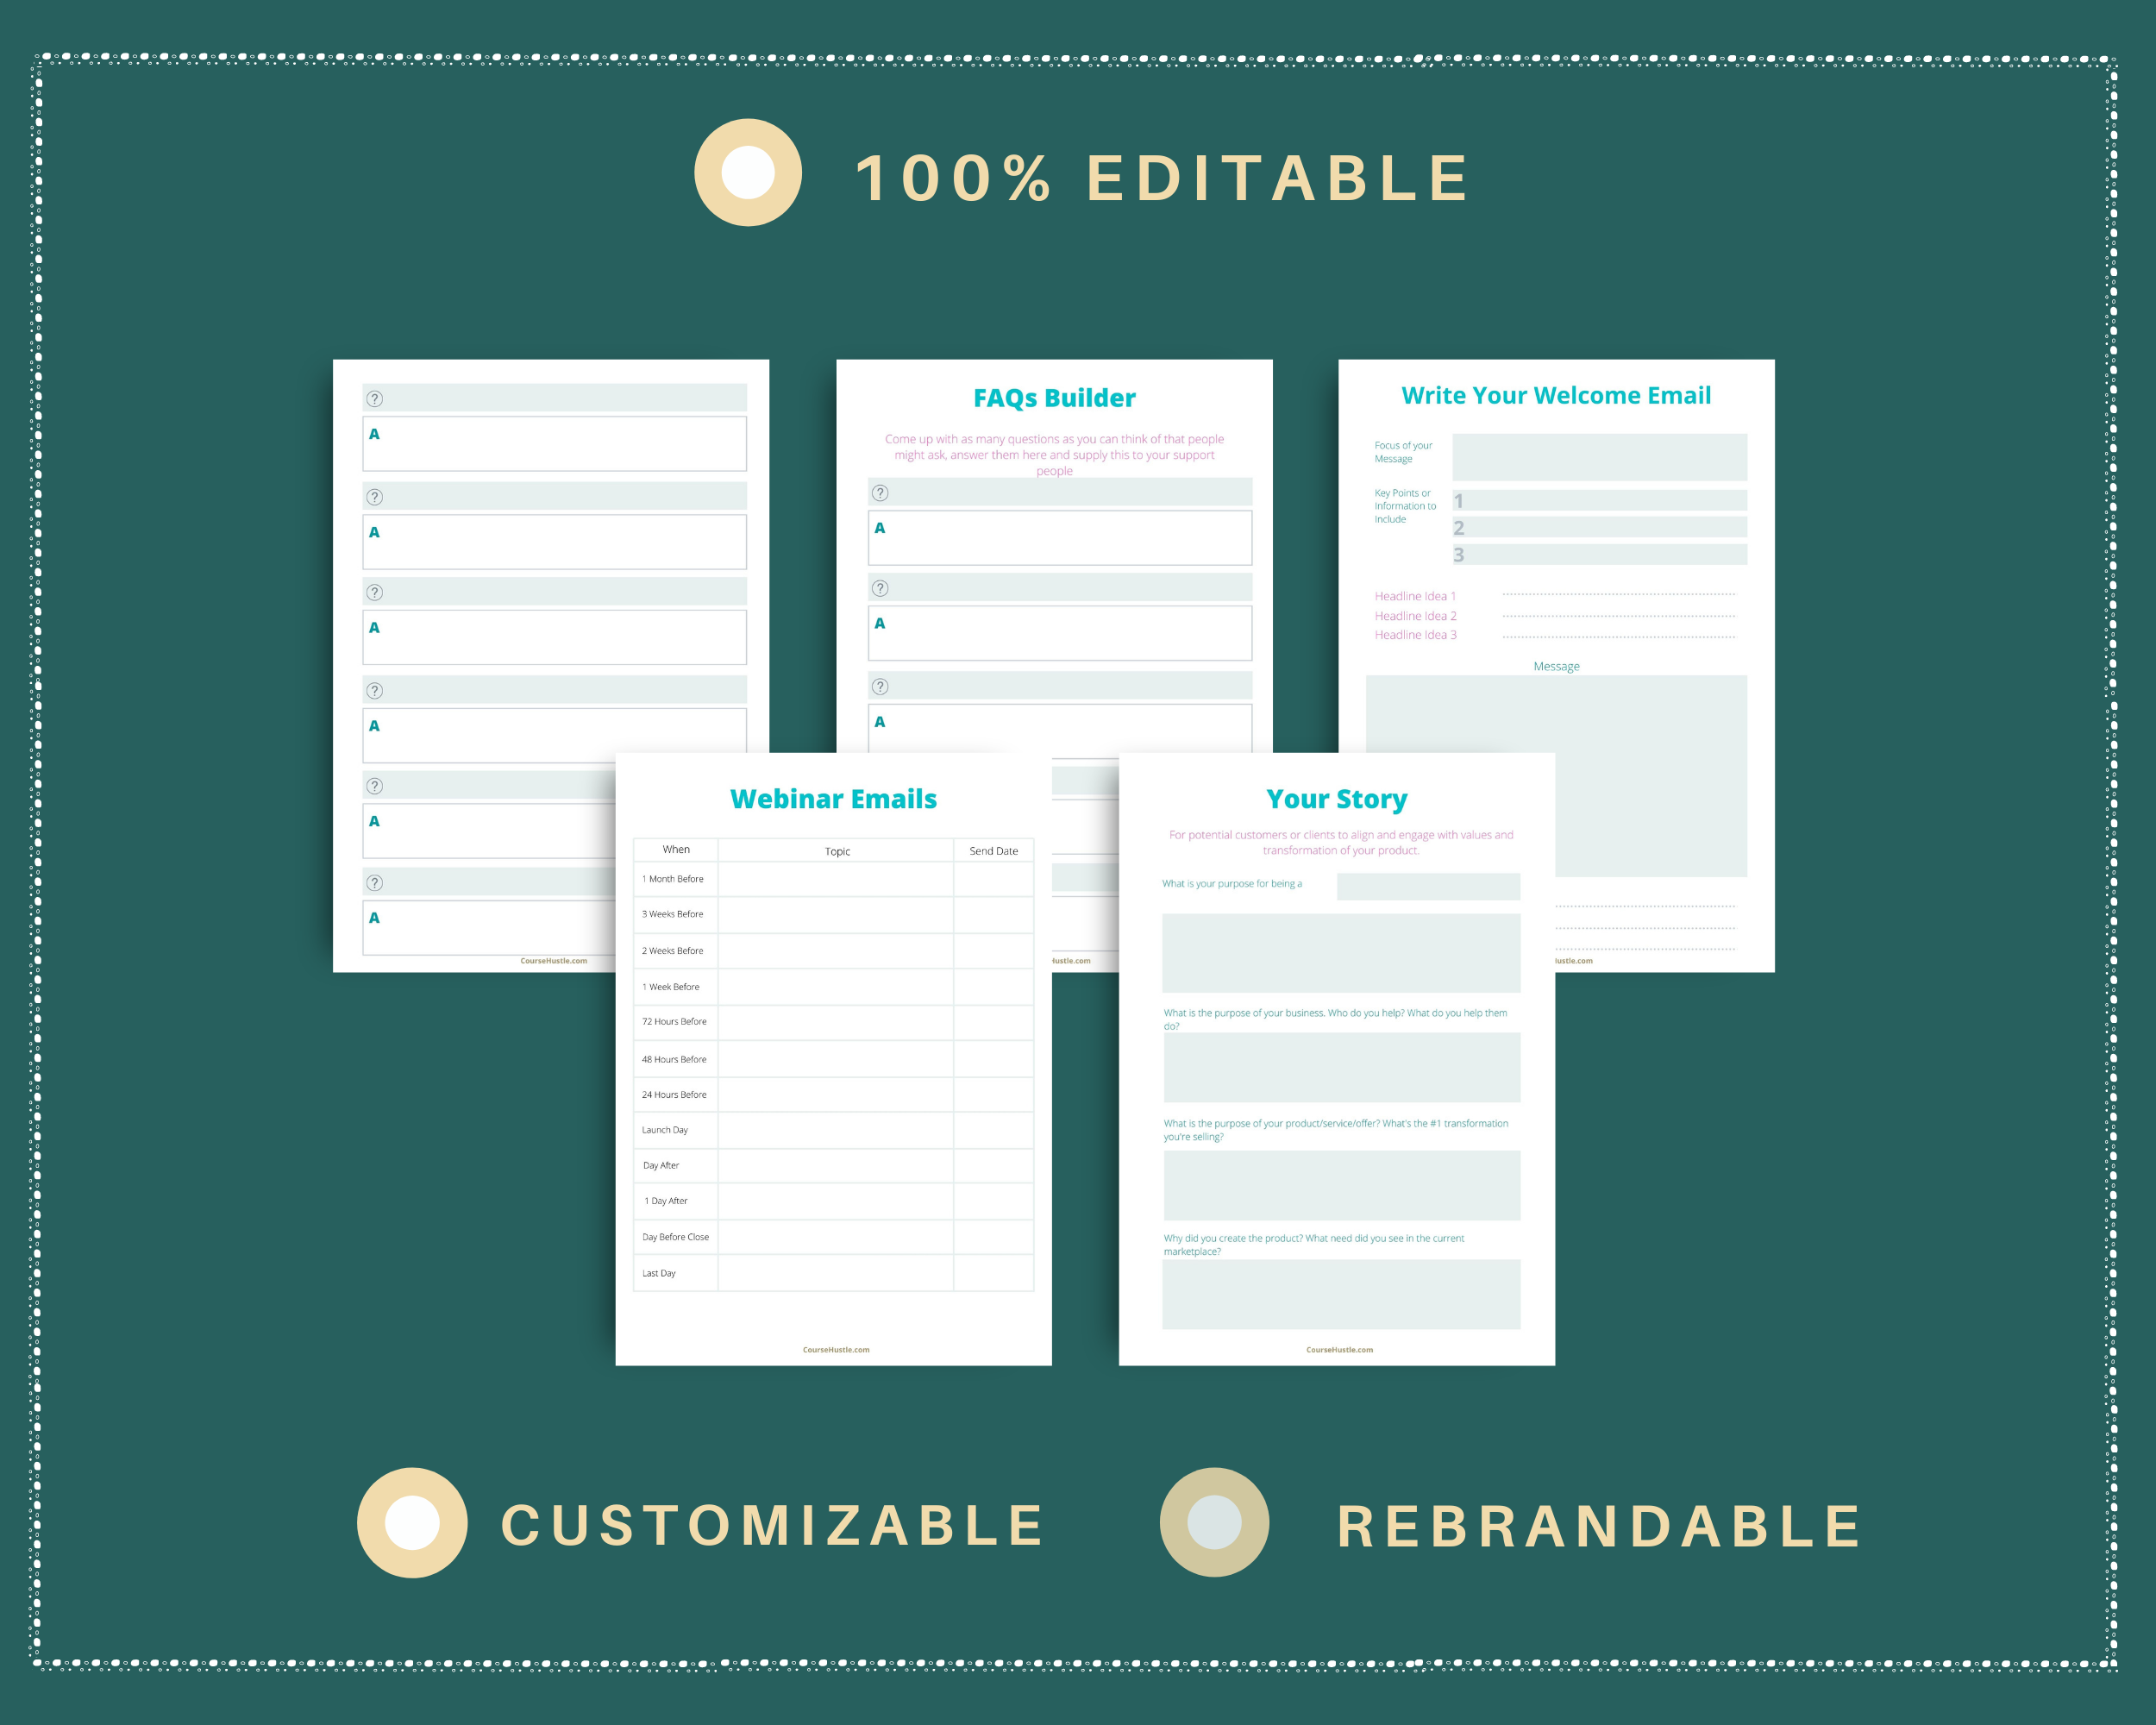 Pre-Made Workbook in Canva | Done for You Workbook | Commercial Use